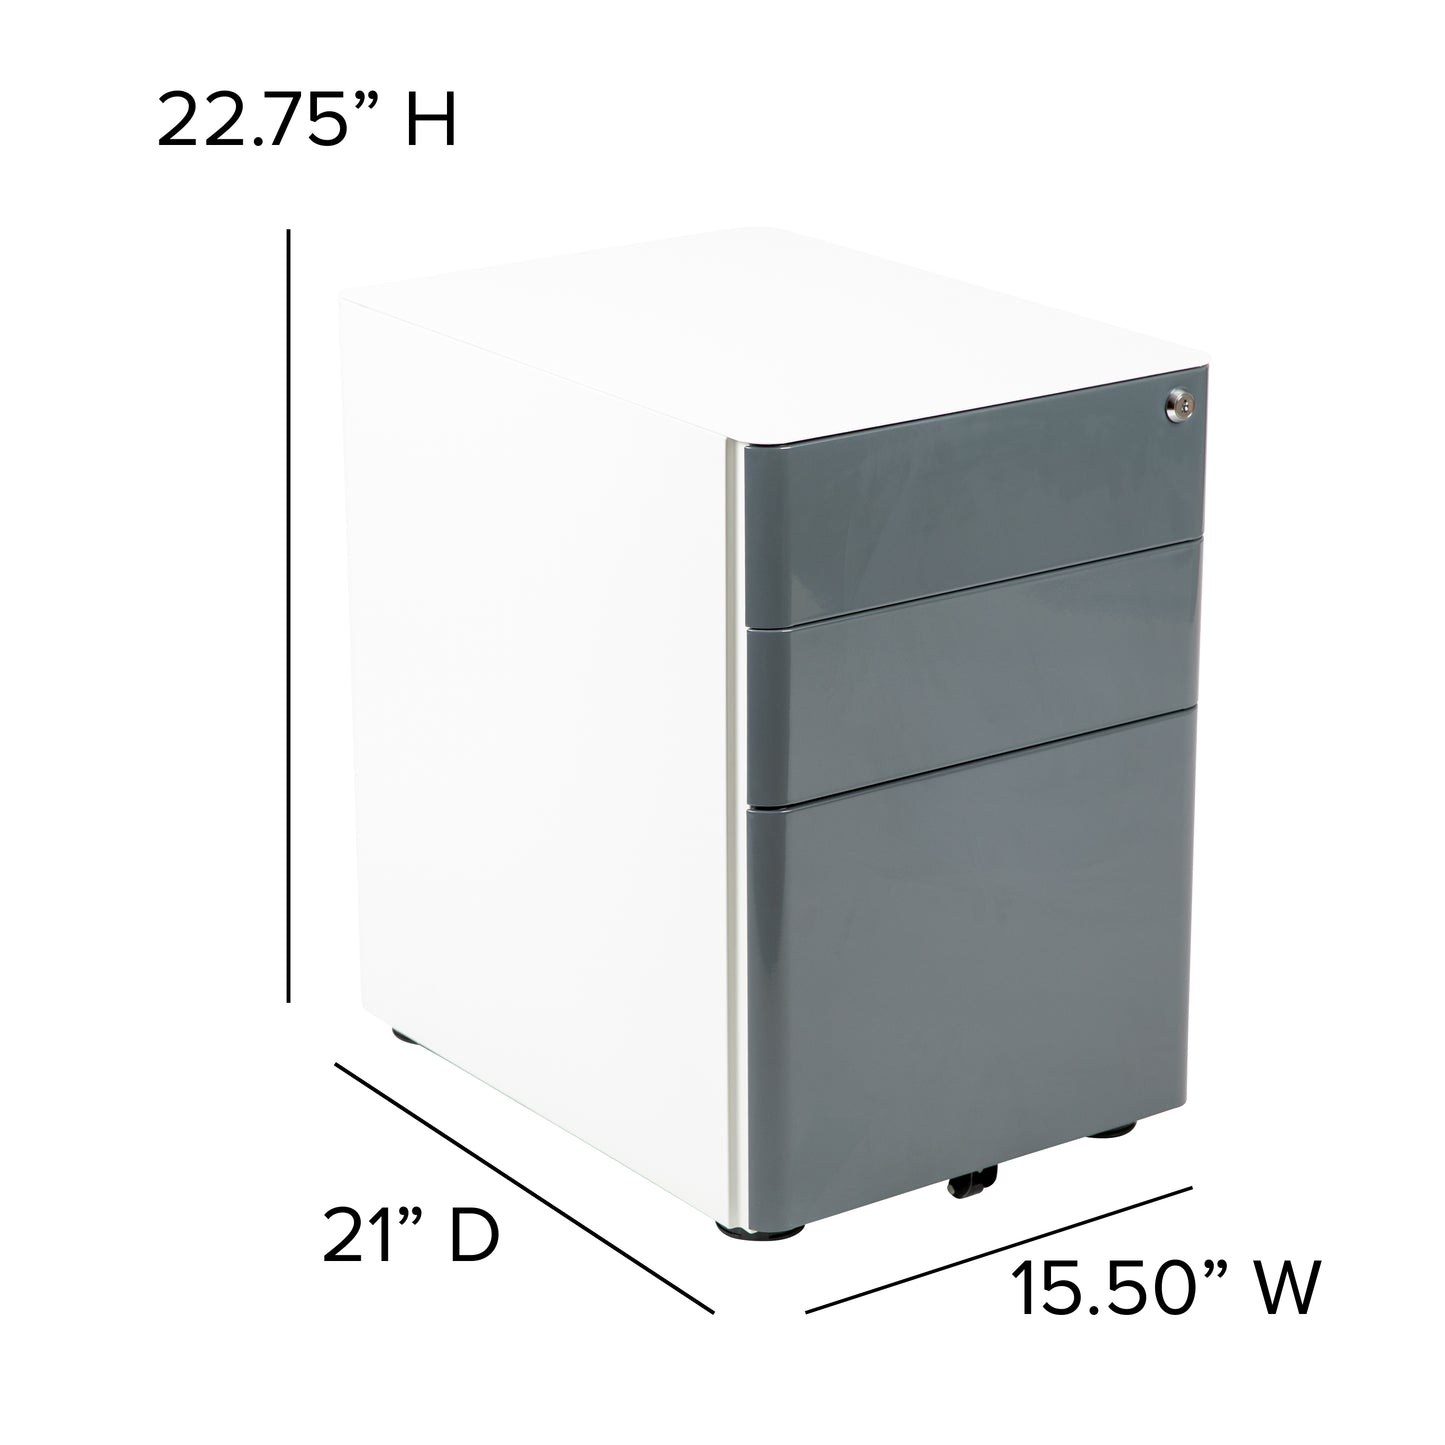 Filing Cabinet-White/Charcoal HZ-CHPL-02-GRY-WH-GG